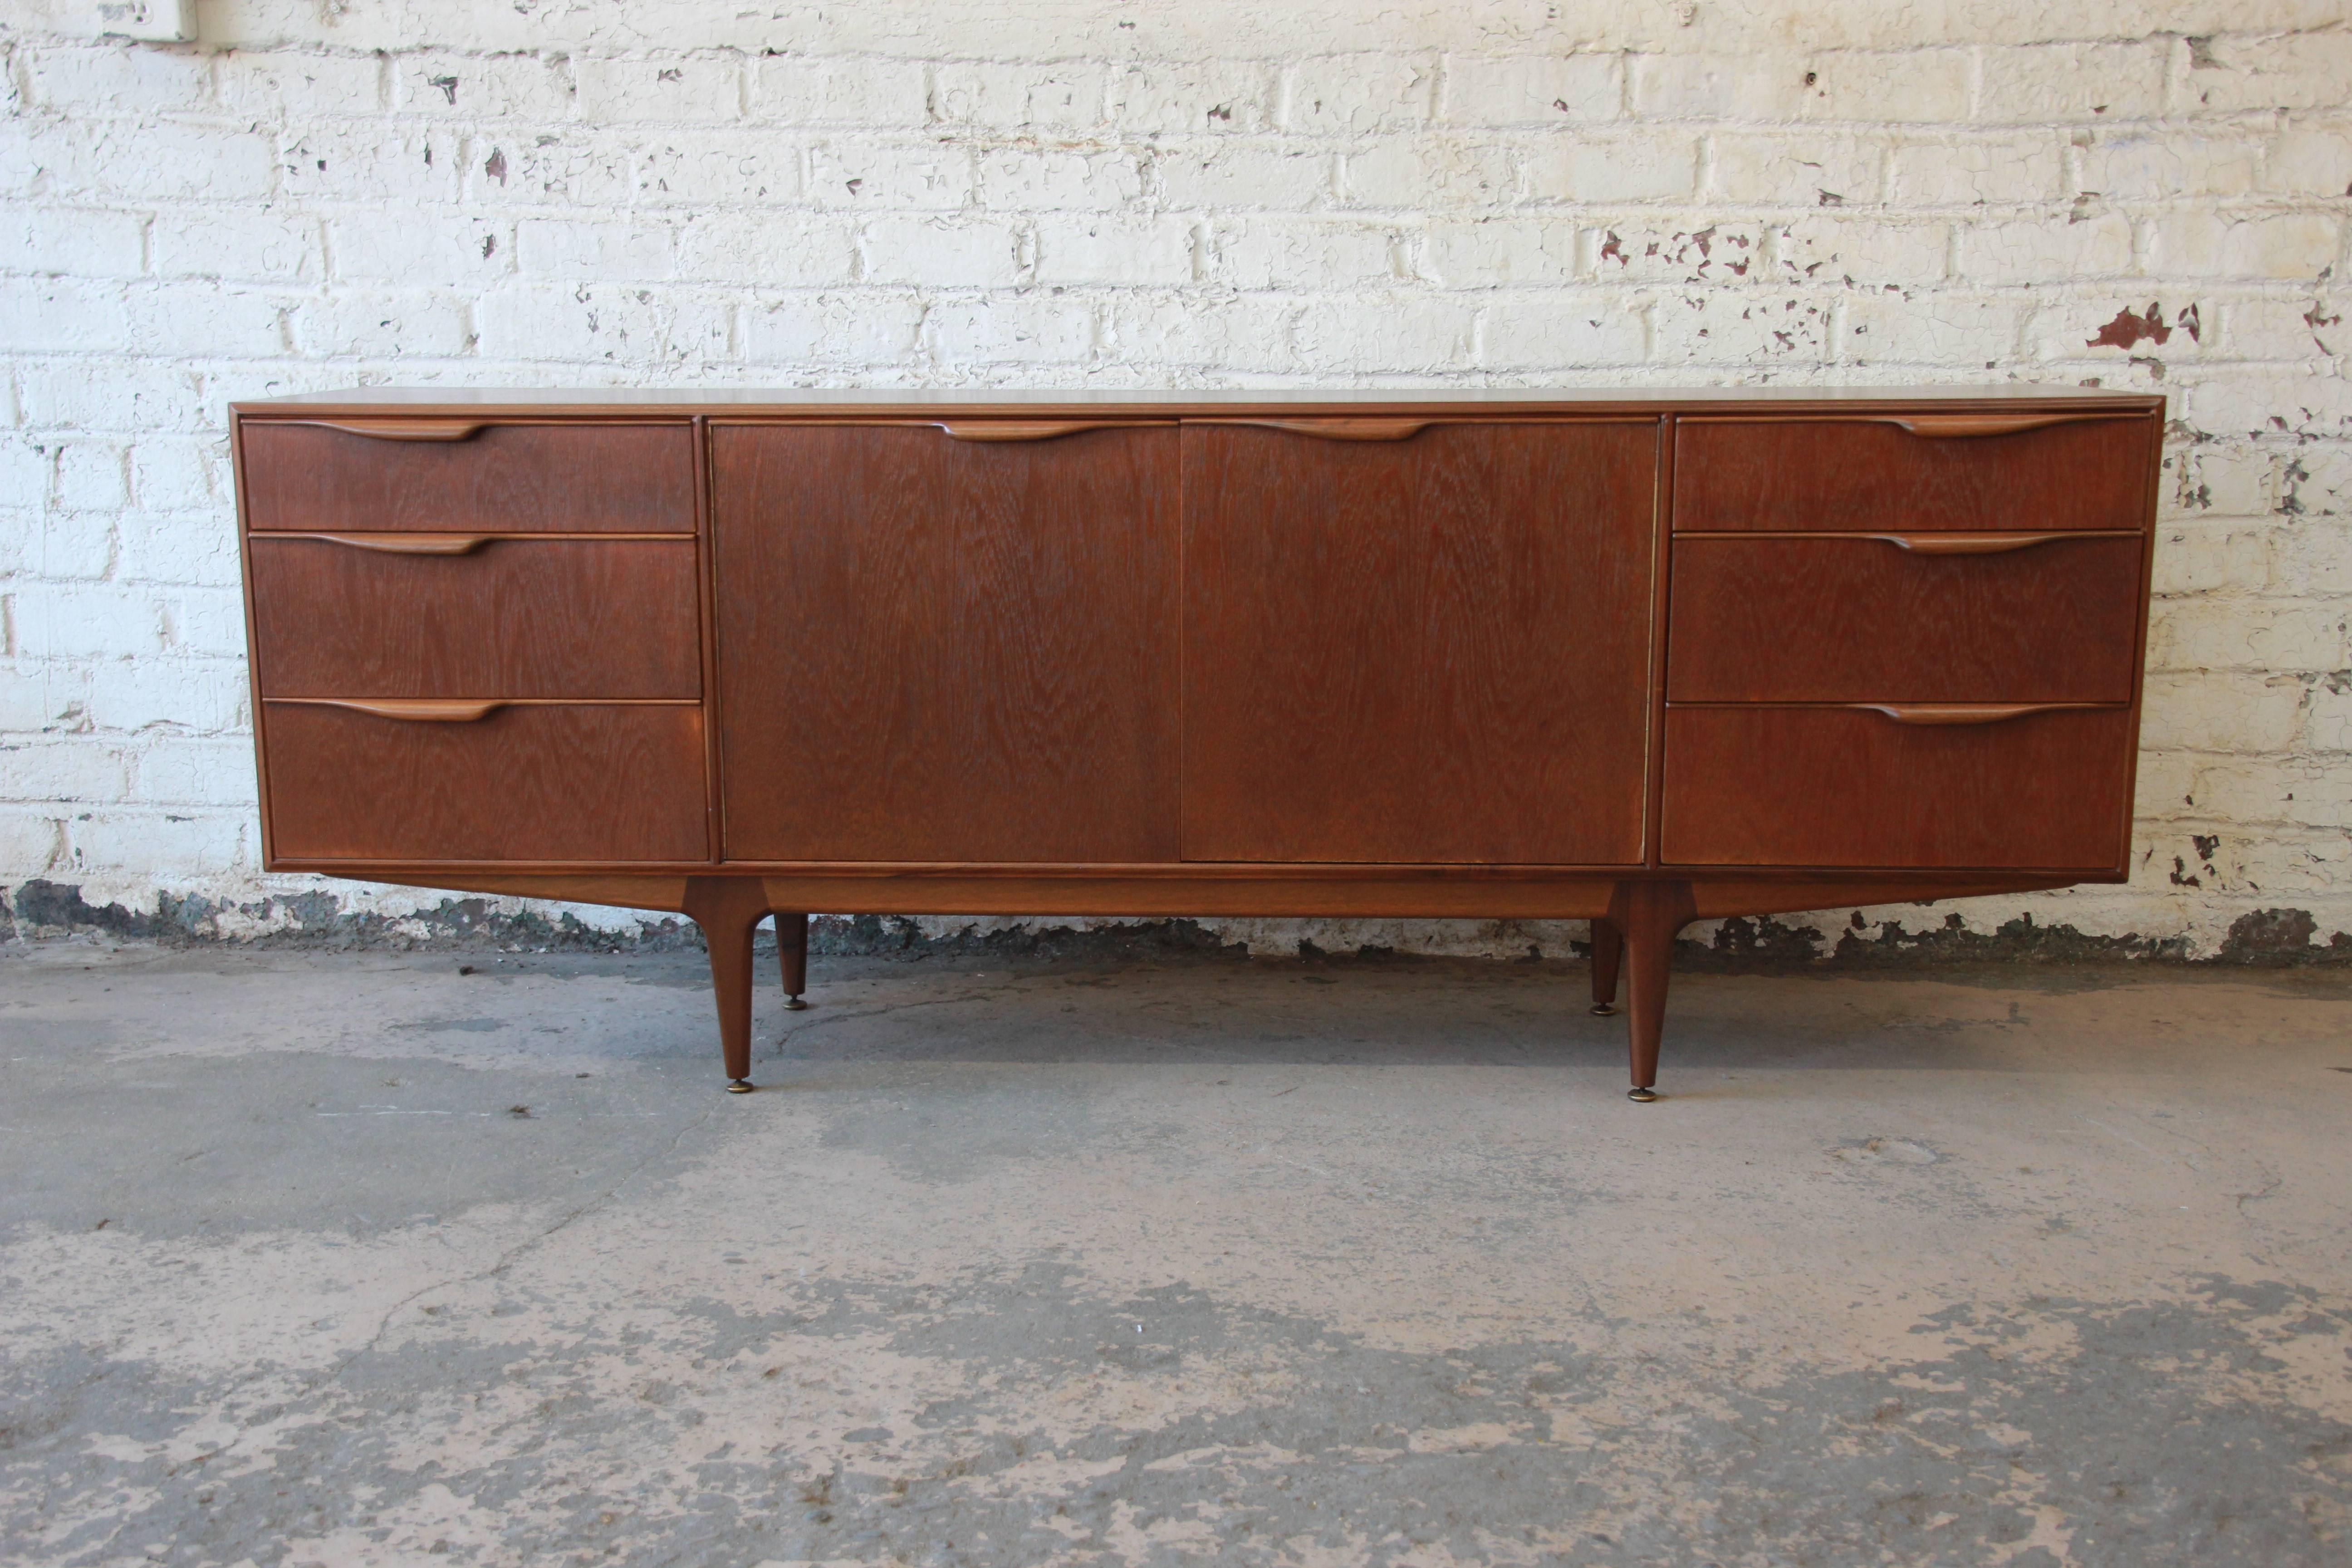 Offering a newly refinished teak sideboard credenza by A.H. McIntosh. The sideboard has a nice symmetrical design with carved teak pulls on the drawers that flank the centre cabinet area. The cabinet doors open up to a shelf for storage and bottle